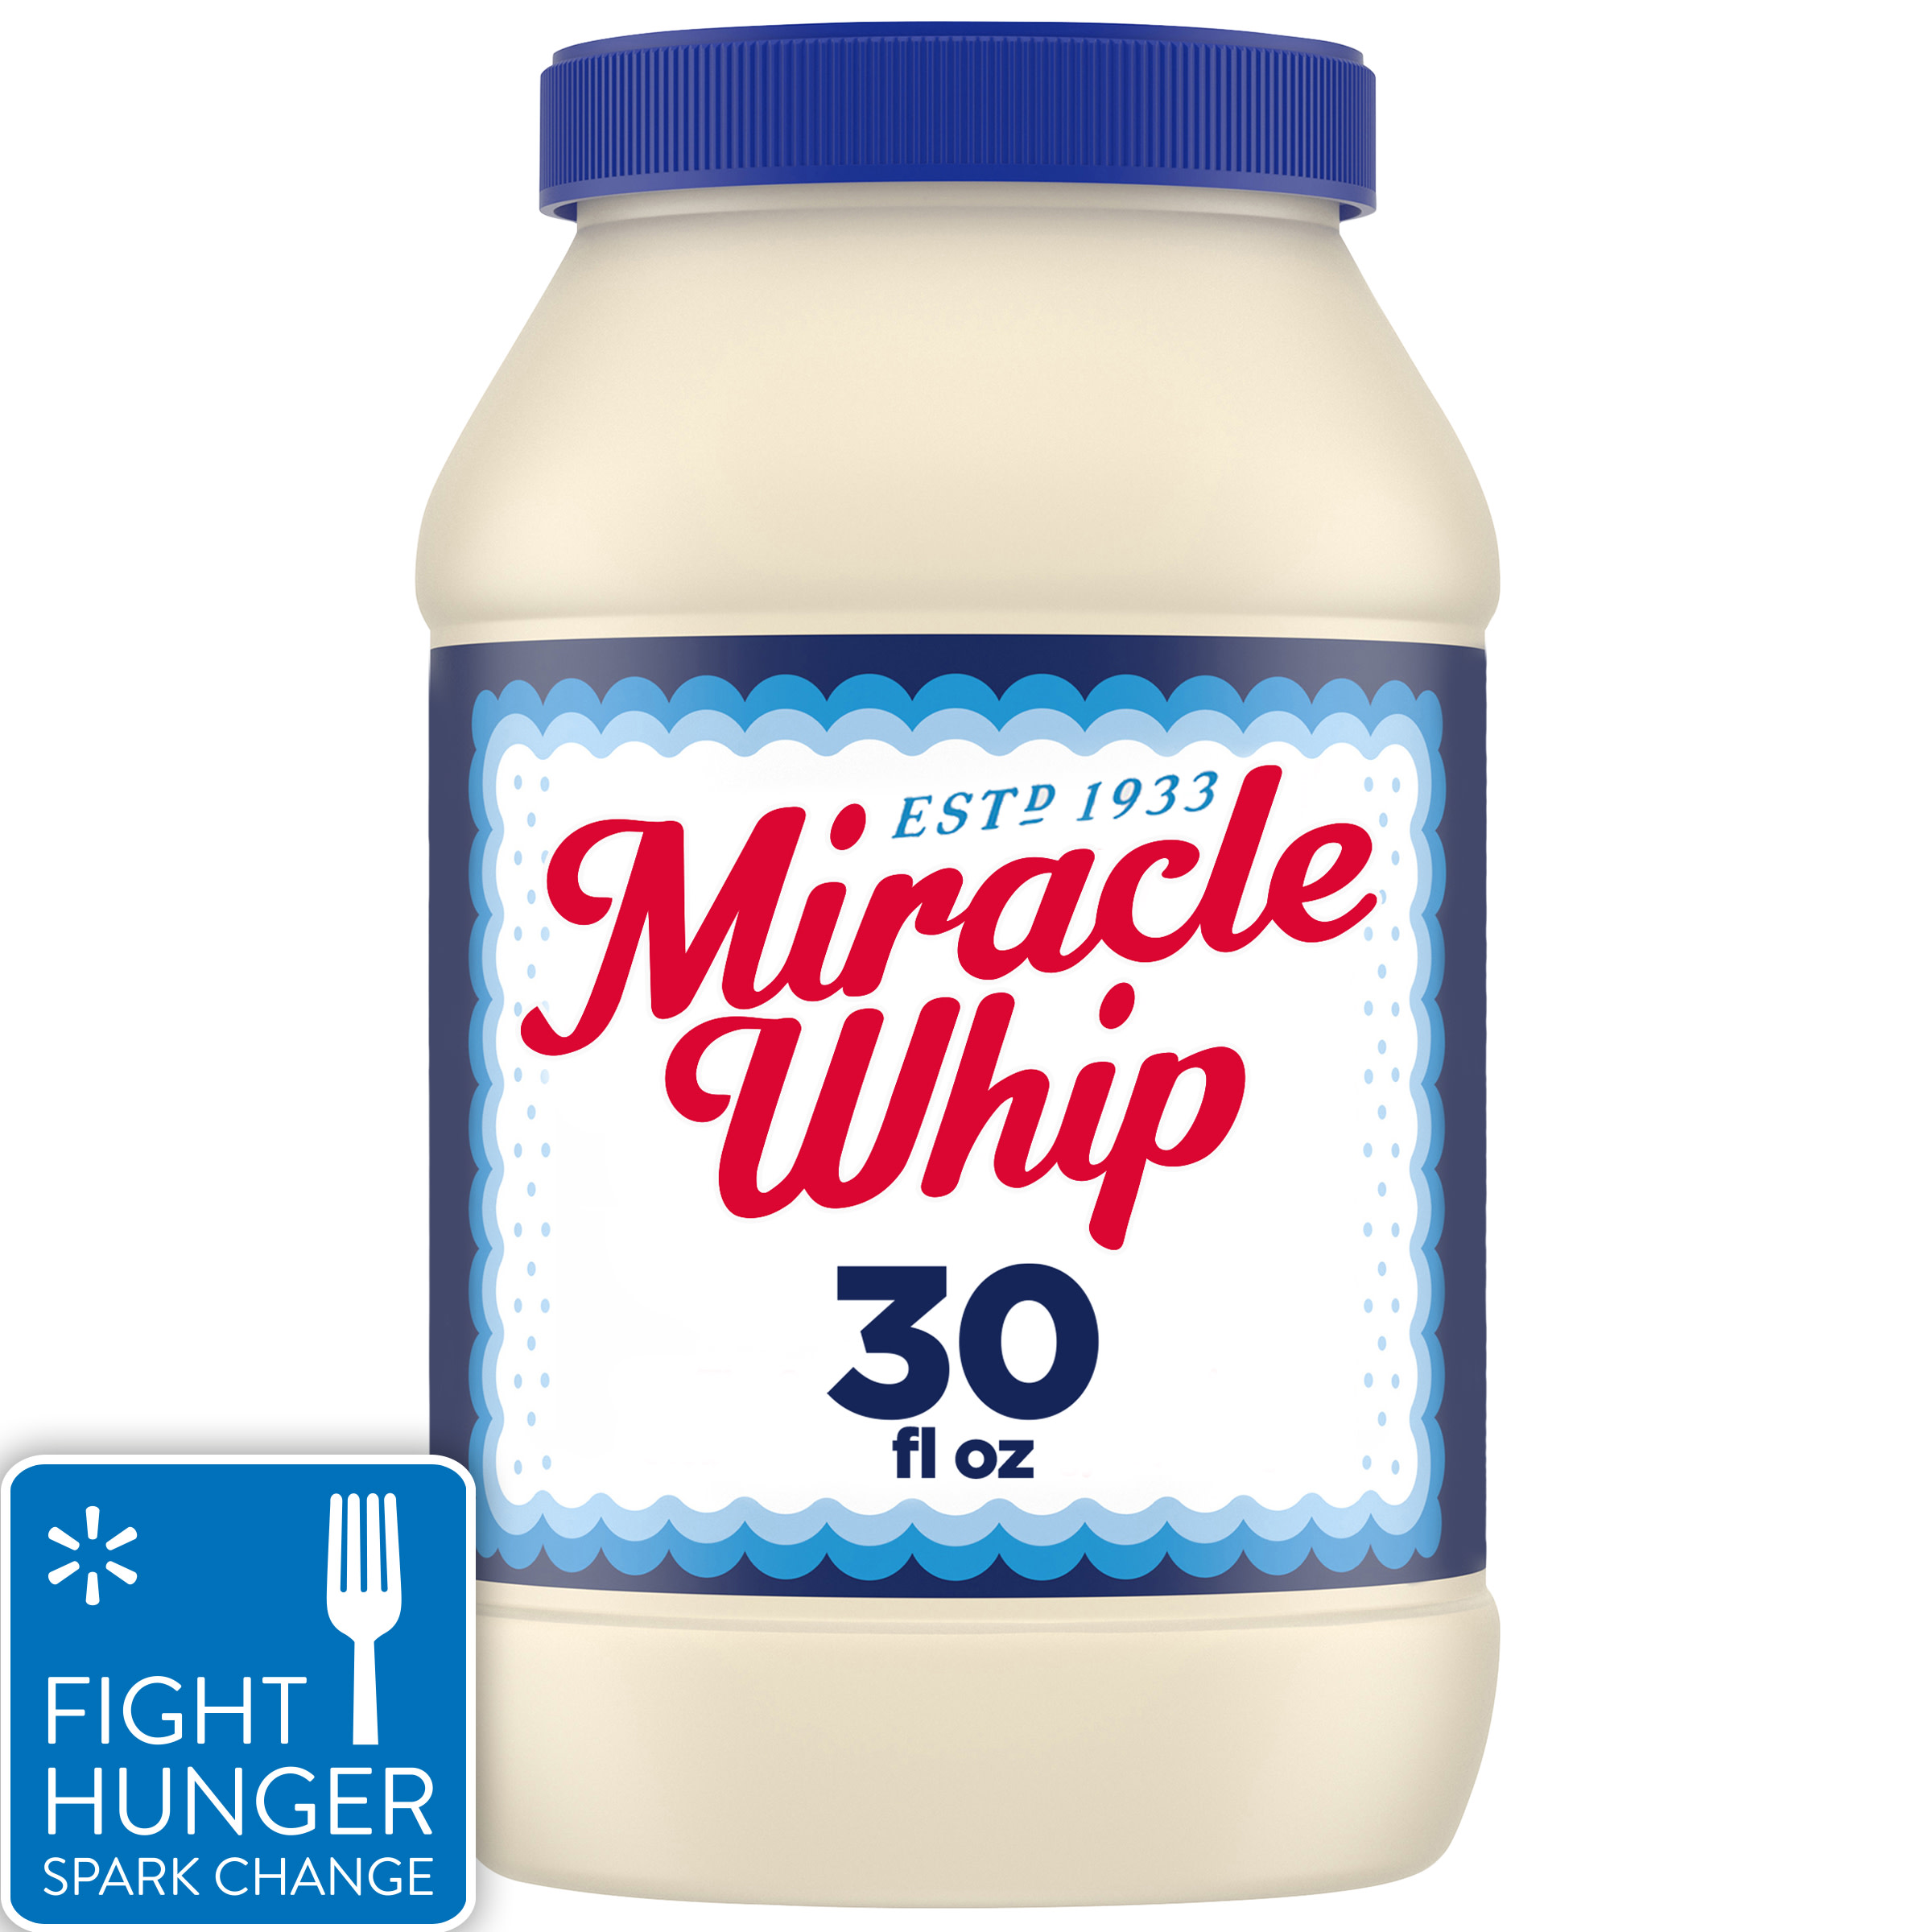 Miracle Whip Mayo-like Dressing, for a Keto and Low Carb Lifestyle, 30 fl oz Jar - image 1 of 18